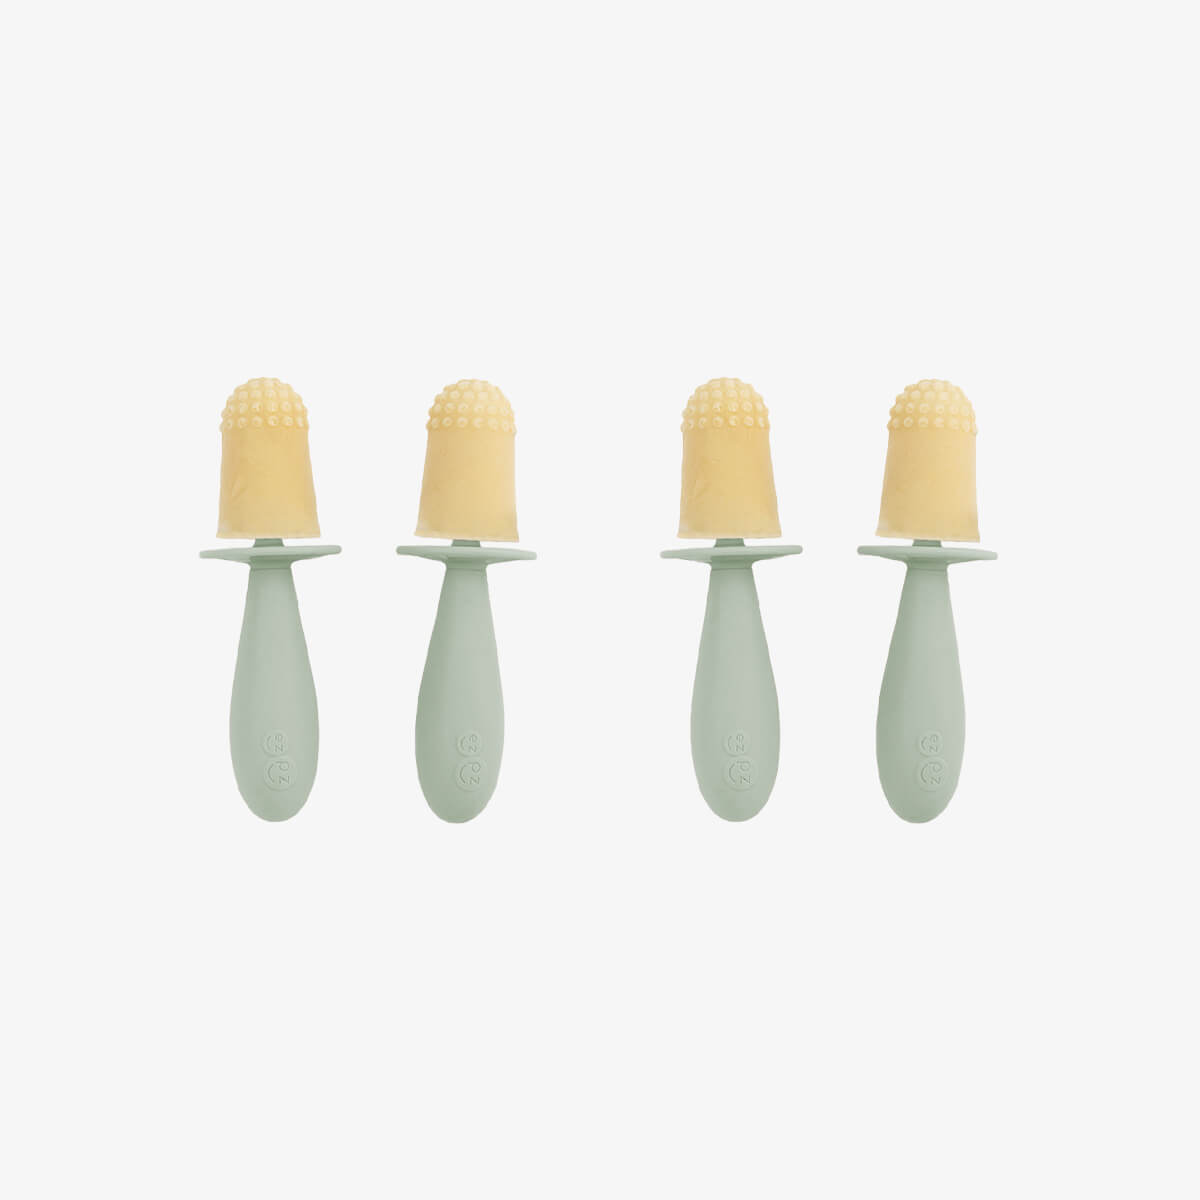 Tiny Pops in Sage Green / Silicone Popsicle Mold for Babies, Frozen Puree & Breastmilk Popsicles